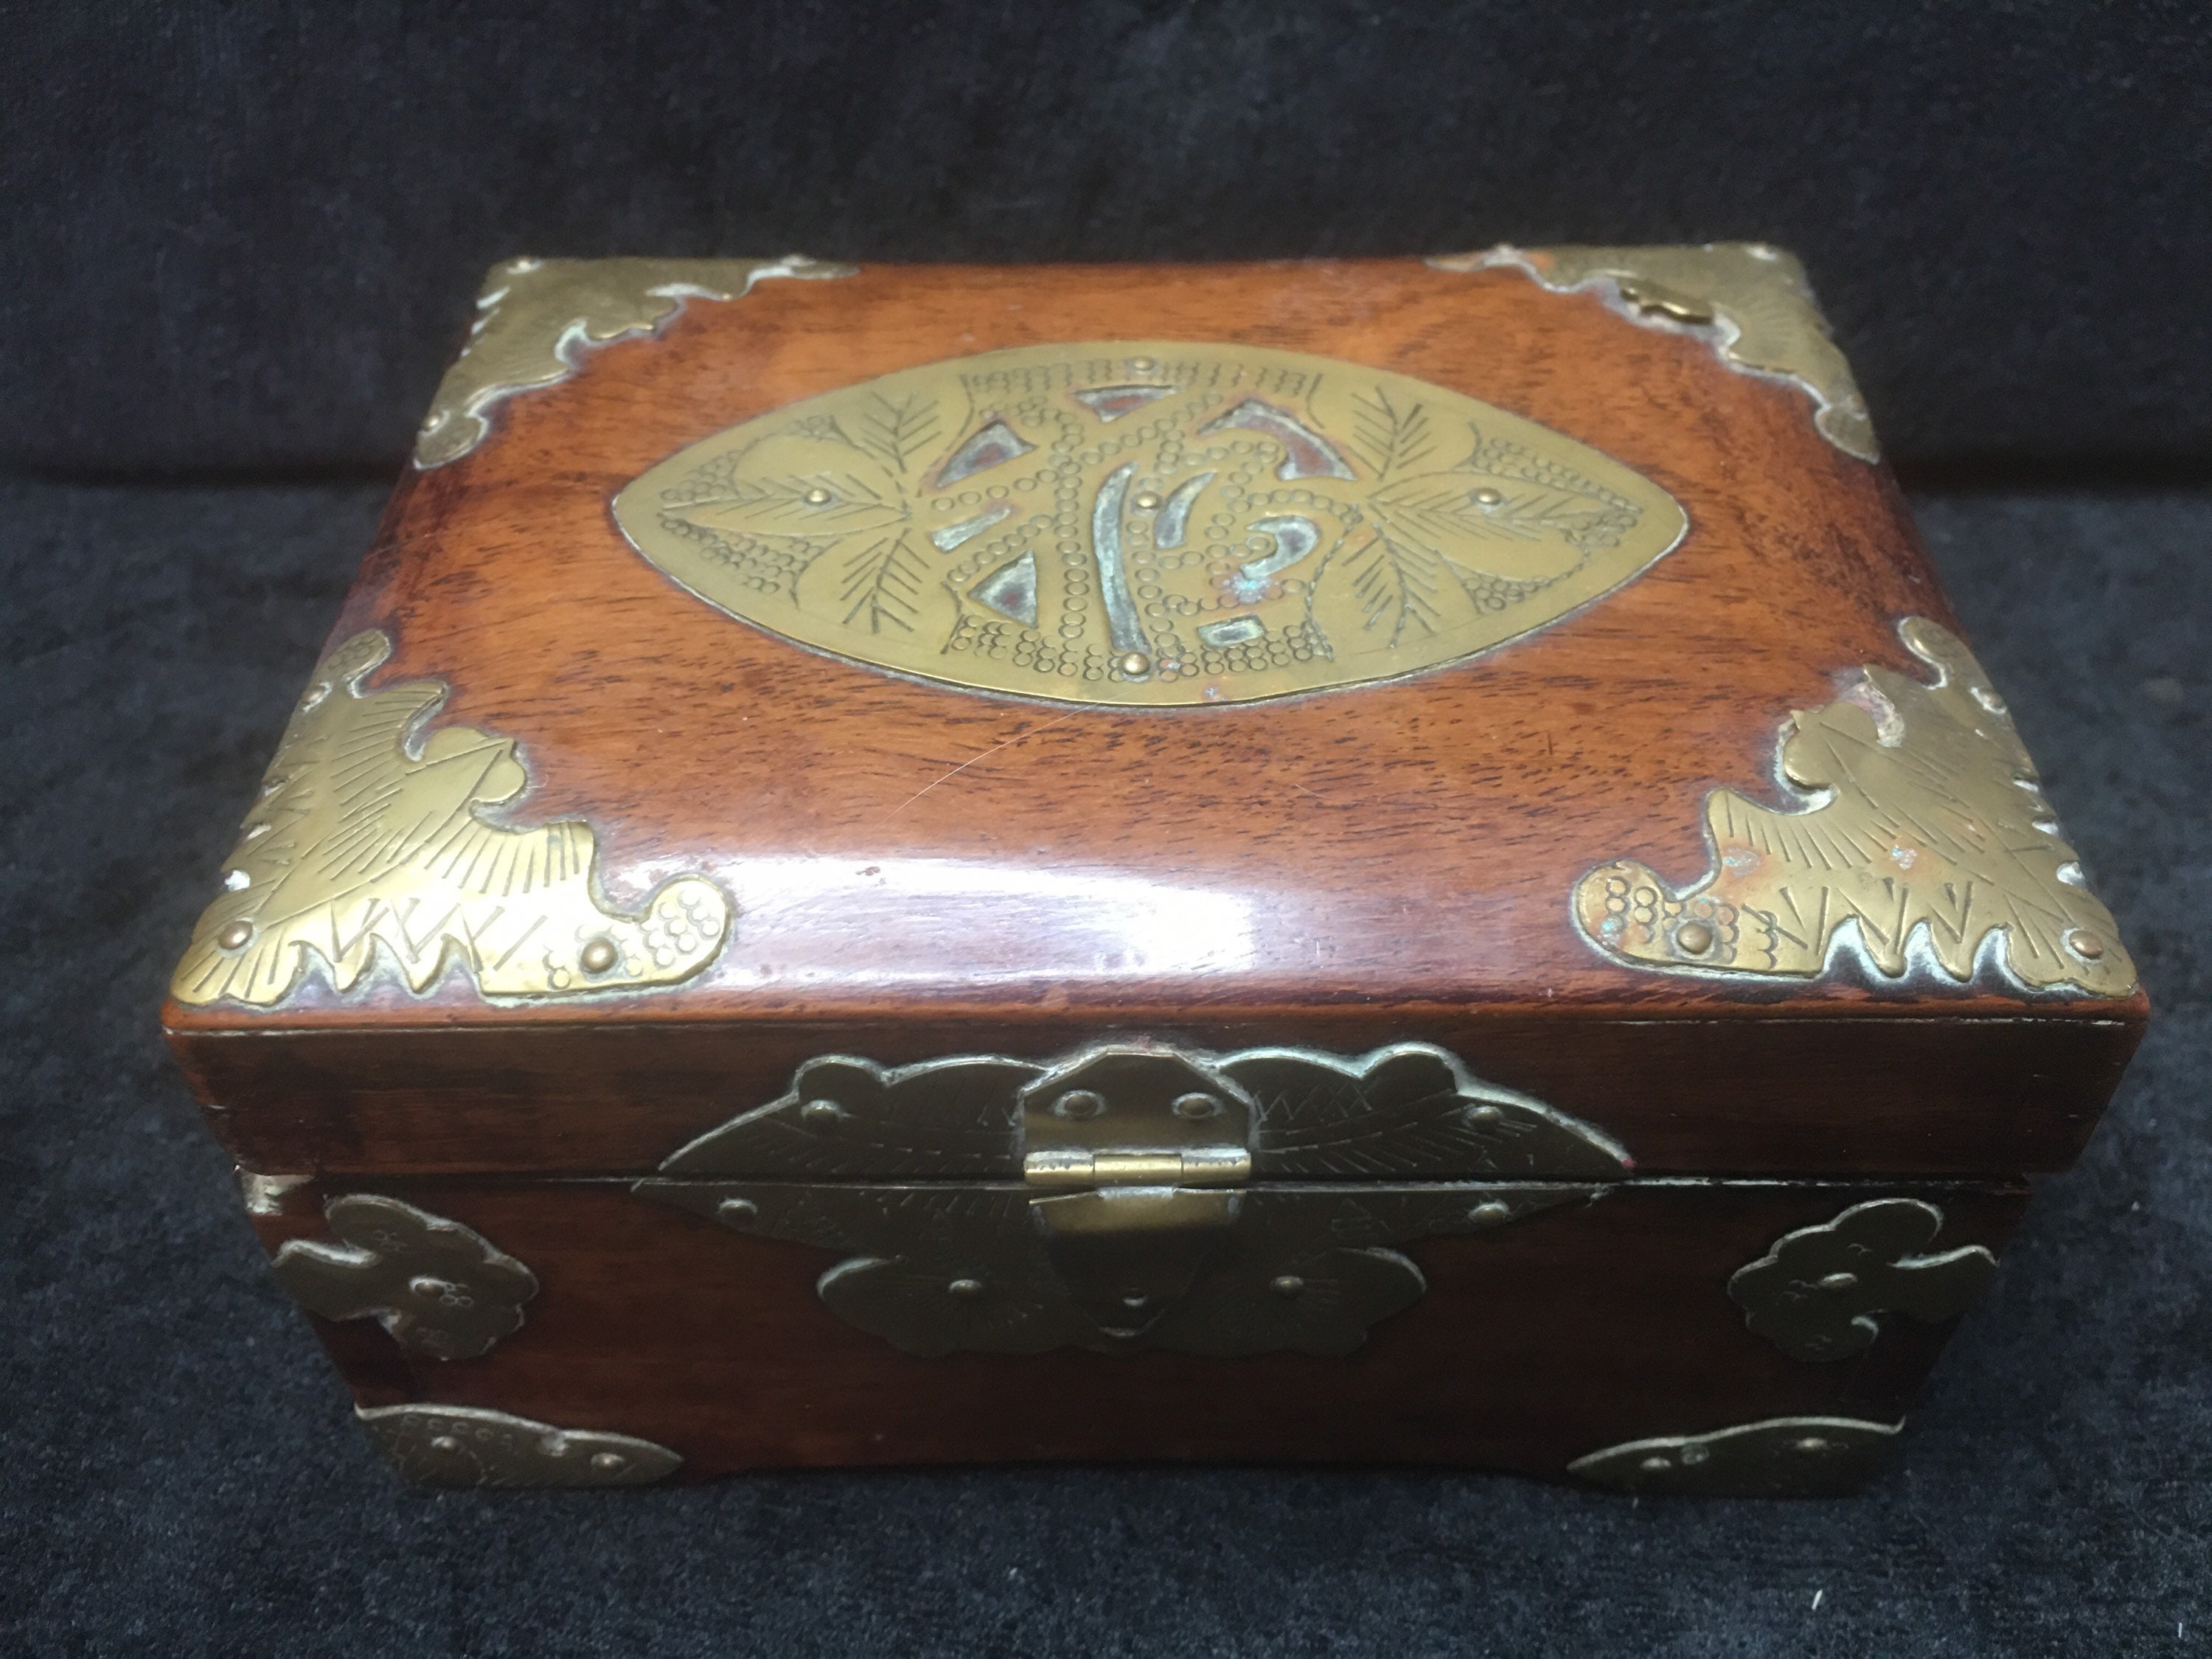 Vintage Chinese Wood Lacquered Jewellery Box With Inlay Jade and Brass  Ornaments. Decorative Jewellery Organizer Box 